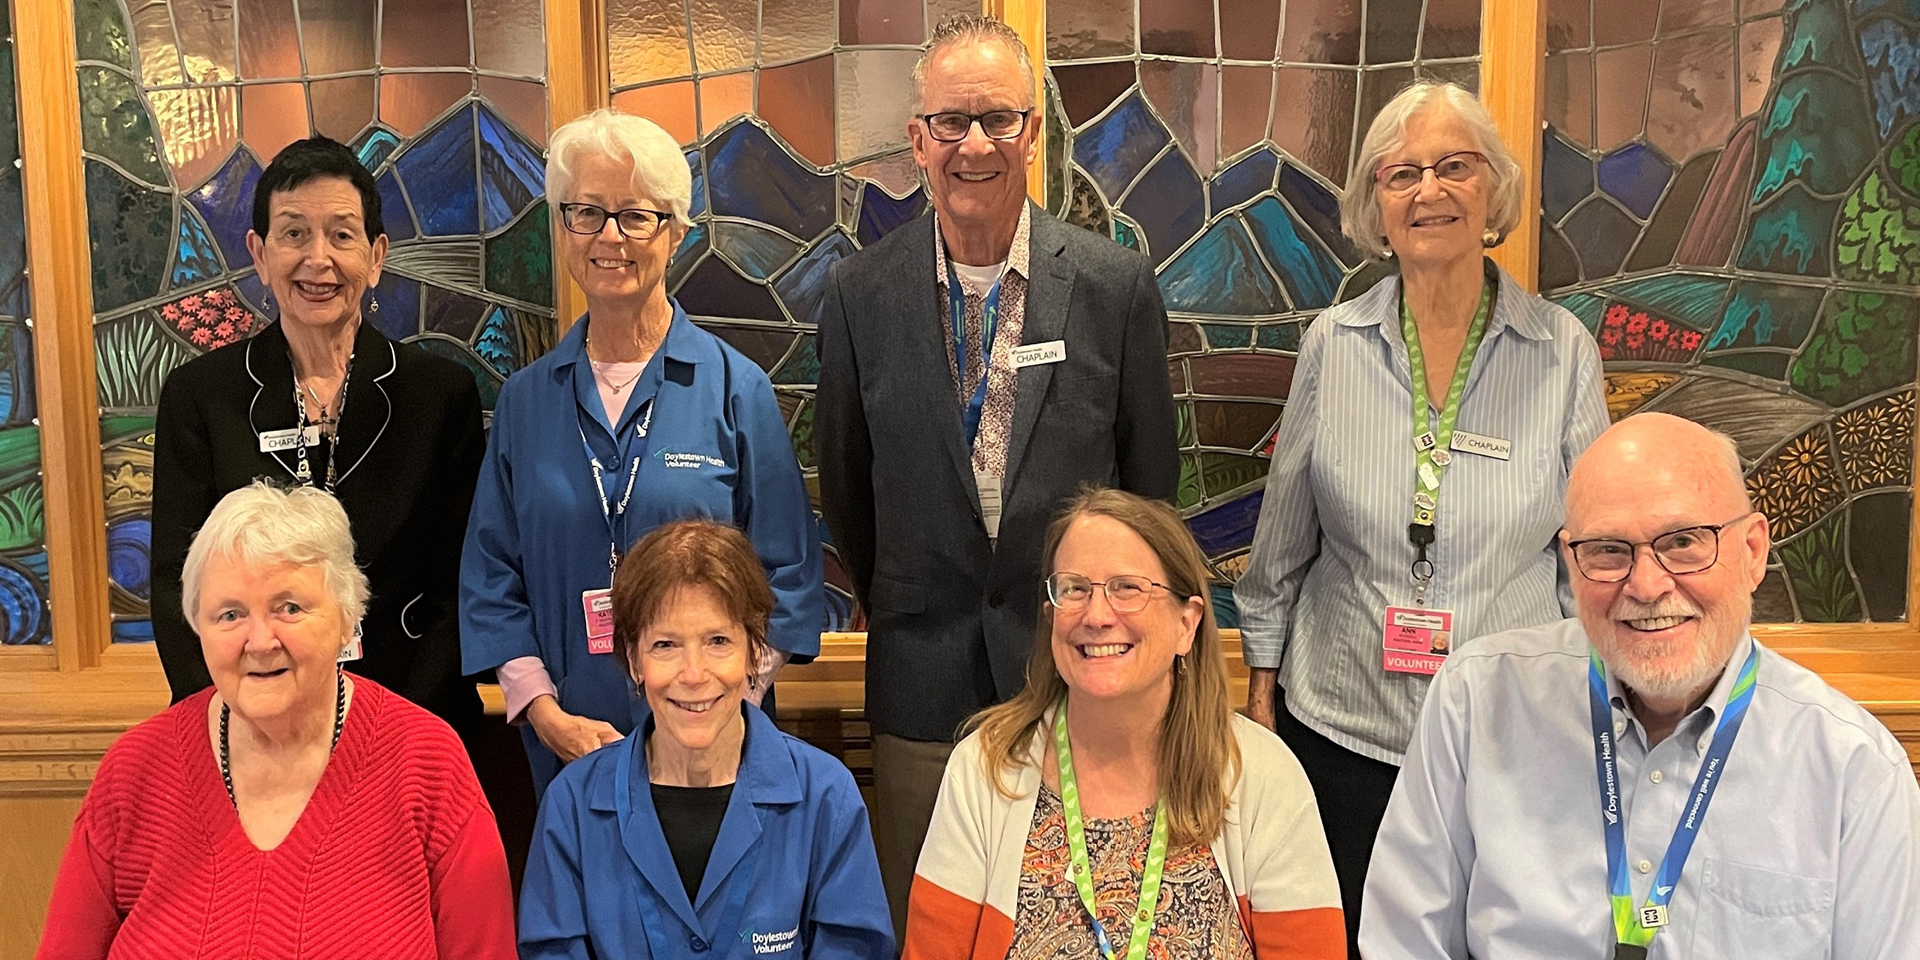 A group of Doylestown Hospital's volunteer chaplains gather in front of the stained glass windows of the hospital's Mary and Gerald Santucci Chapel.